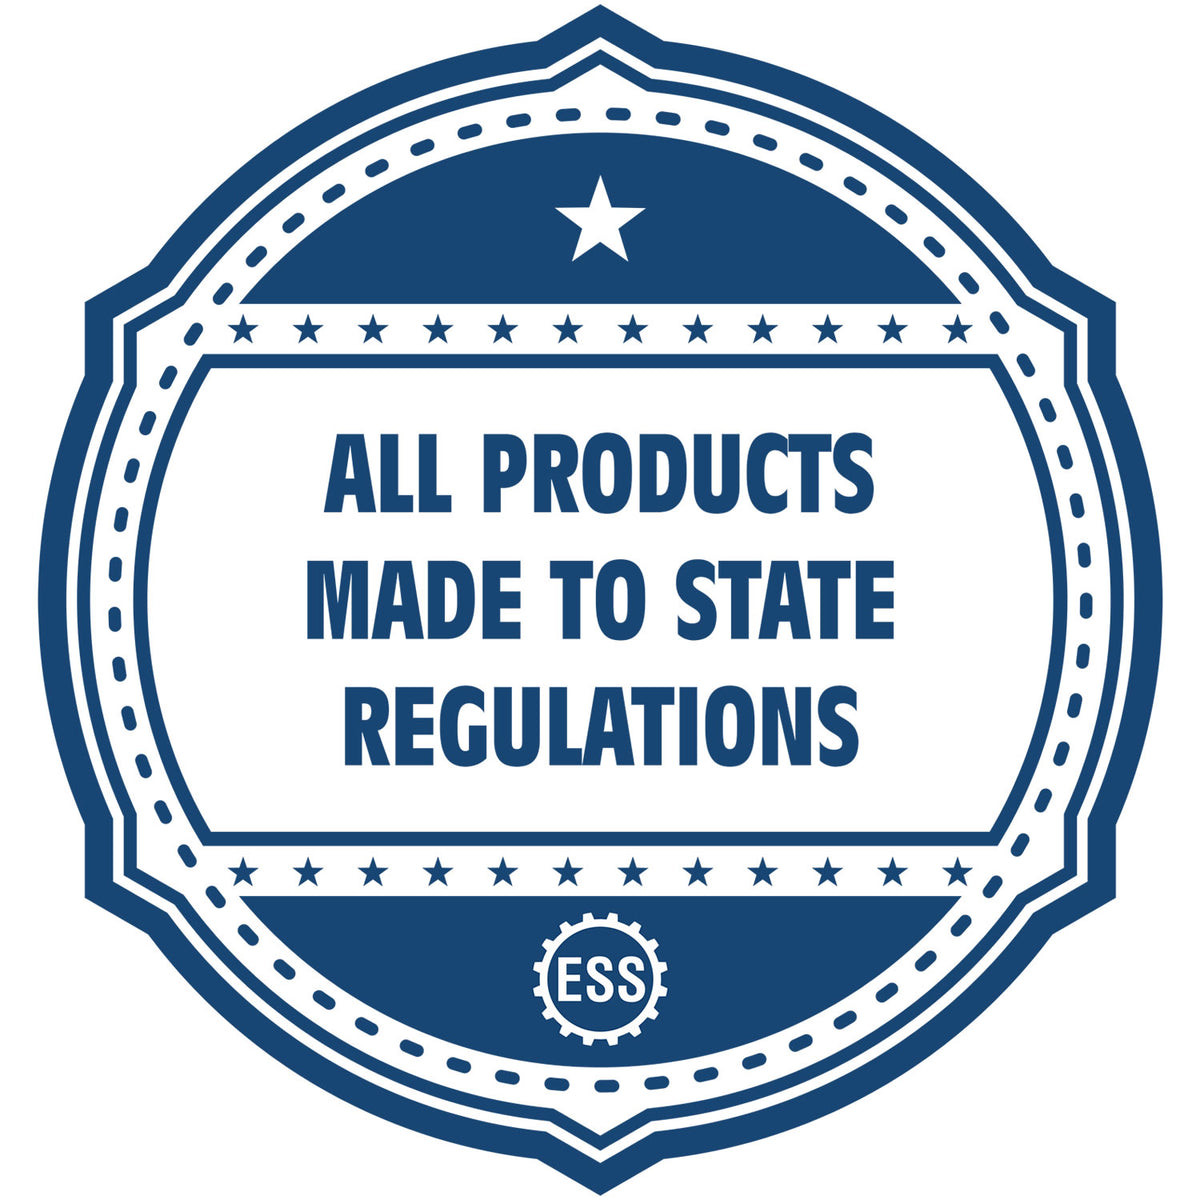 An icon or badge element for the Slim Pre-Inked Rhode Island Architect Seal Stamp showing that this product is made in compliance with state regulations.